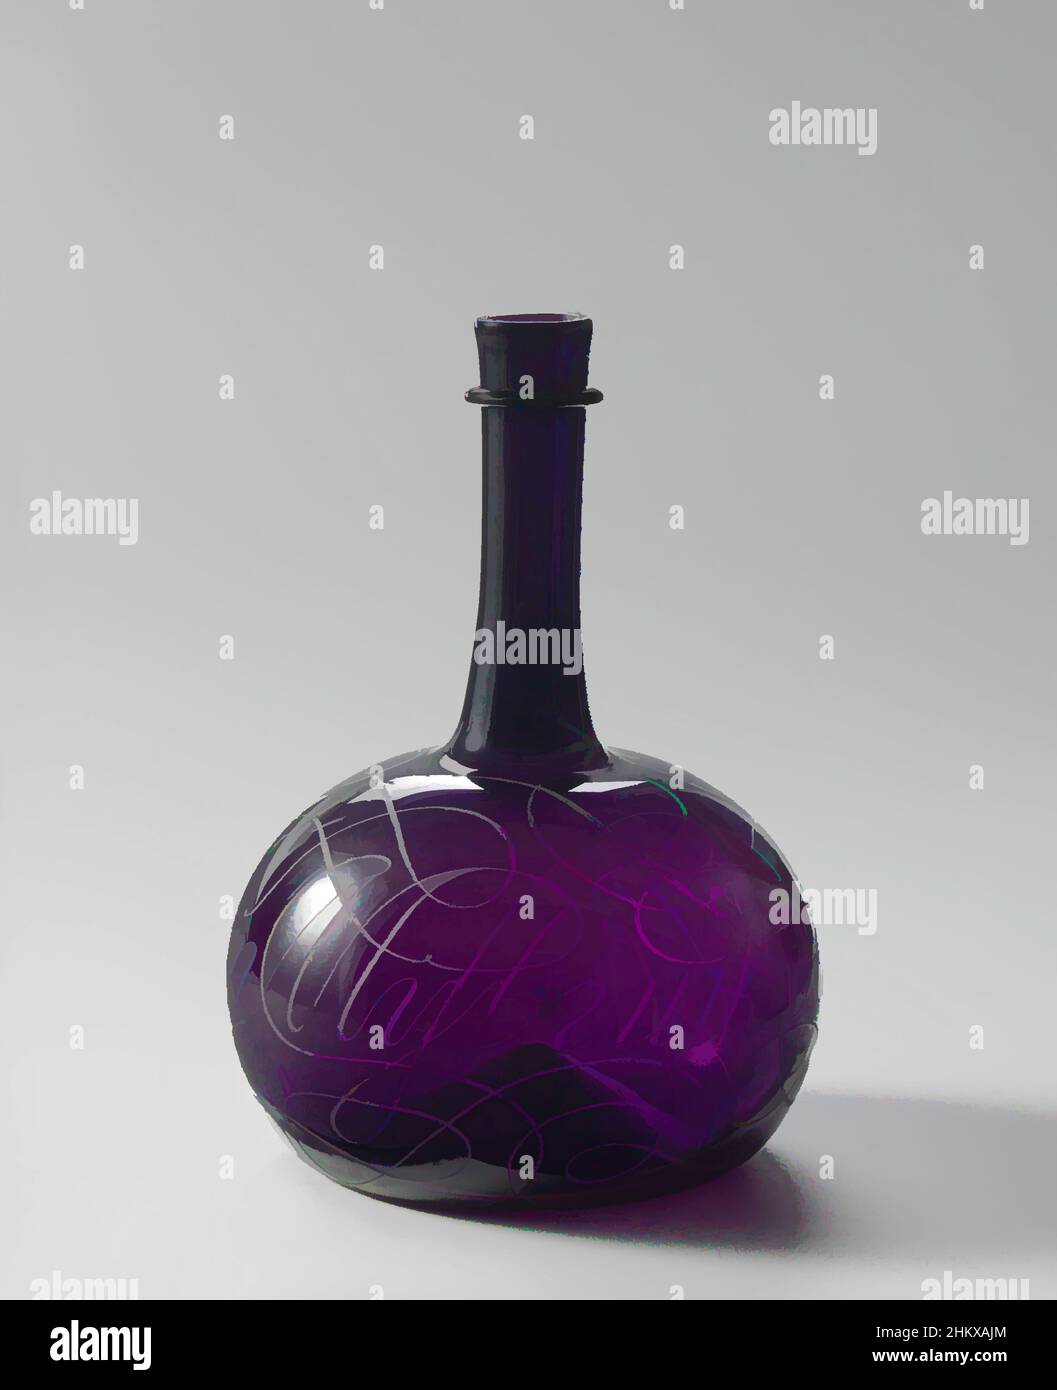 Art inspired by Bottle, Bottle inscribed, Abuse of wyn.is Soul phenine, Bottle of purple glass with soul inserted. Spherical body, transitioning to a slender neck, which has a ring at the top. On the body is calligraphed in Italian script 'Abuse of wyn.is Soul-phen.' On the bottom, Classic works modernized by Artotop with a splash of modernity. Shapes, color and value, eye-catching visual impact on art. Emotions through freedom of artworks in a contemporary way. A timeless message pursuing a wildly creative new direction. Artists turning to the digital medium and creating the Artotop NFT Stock Photo